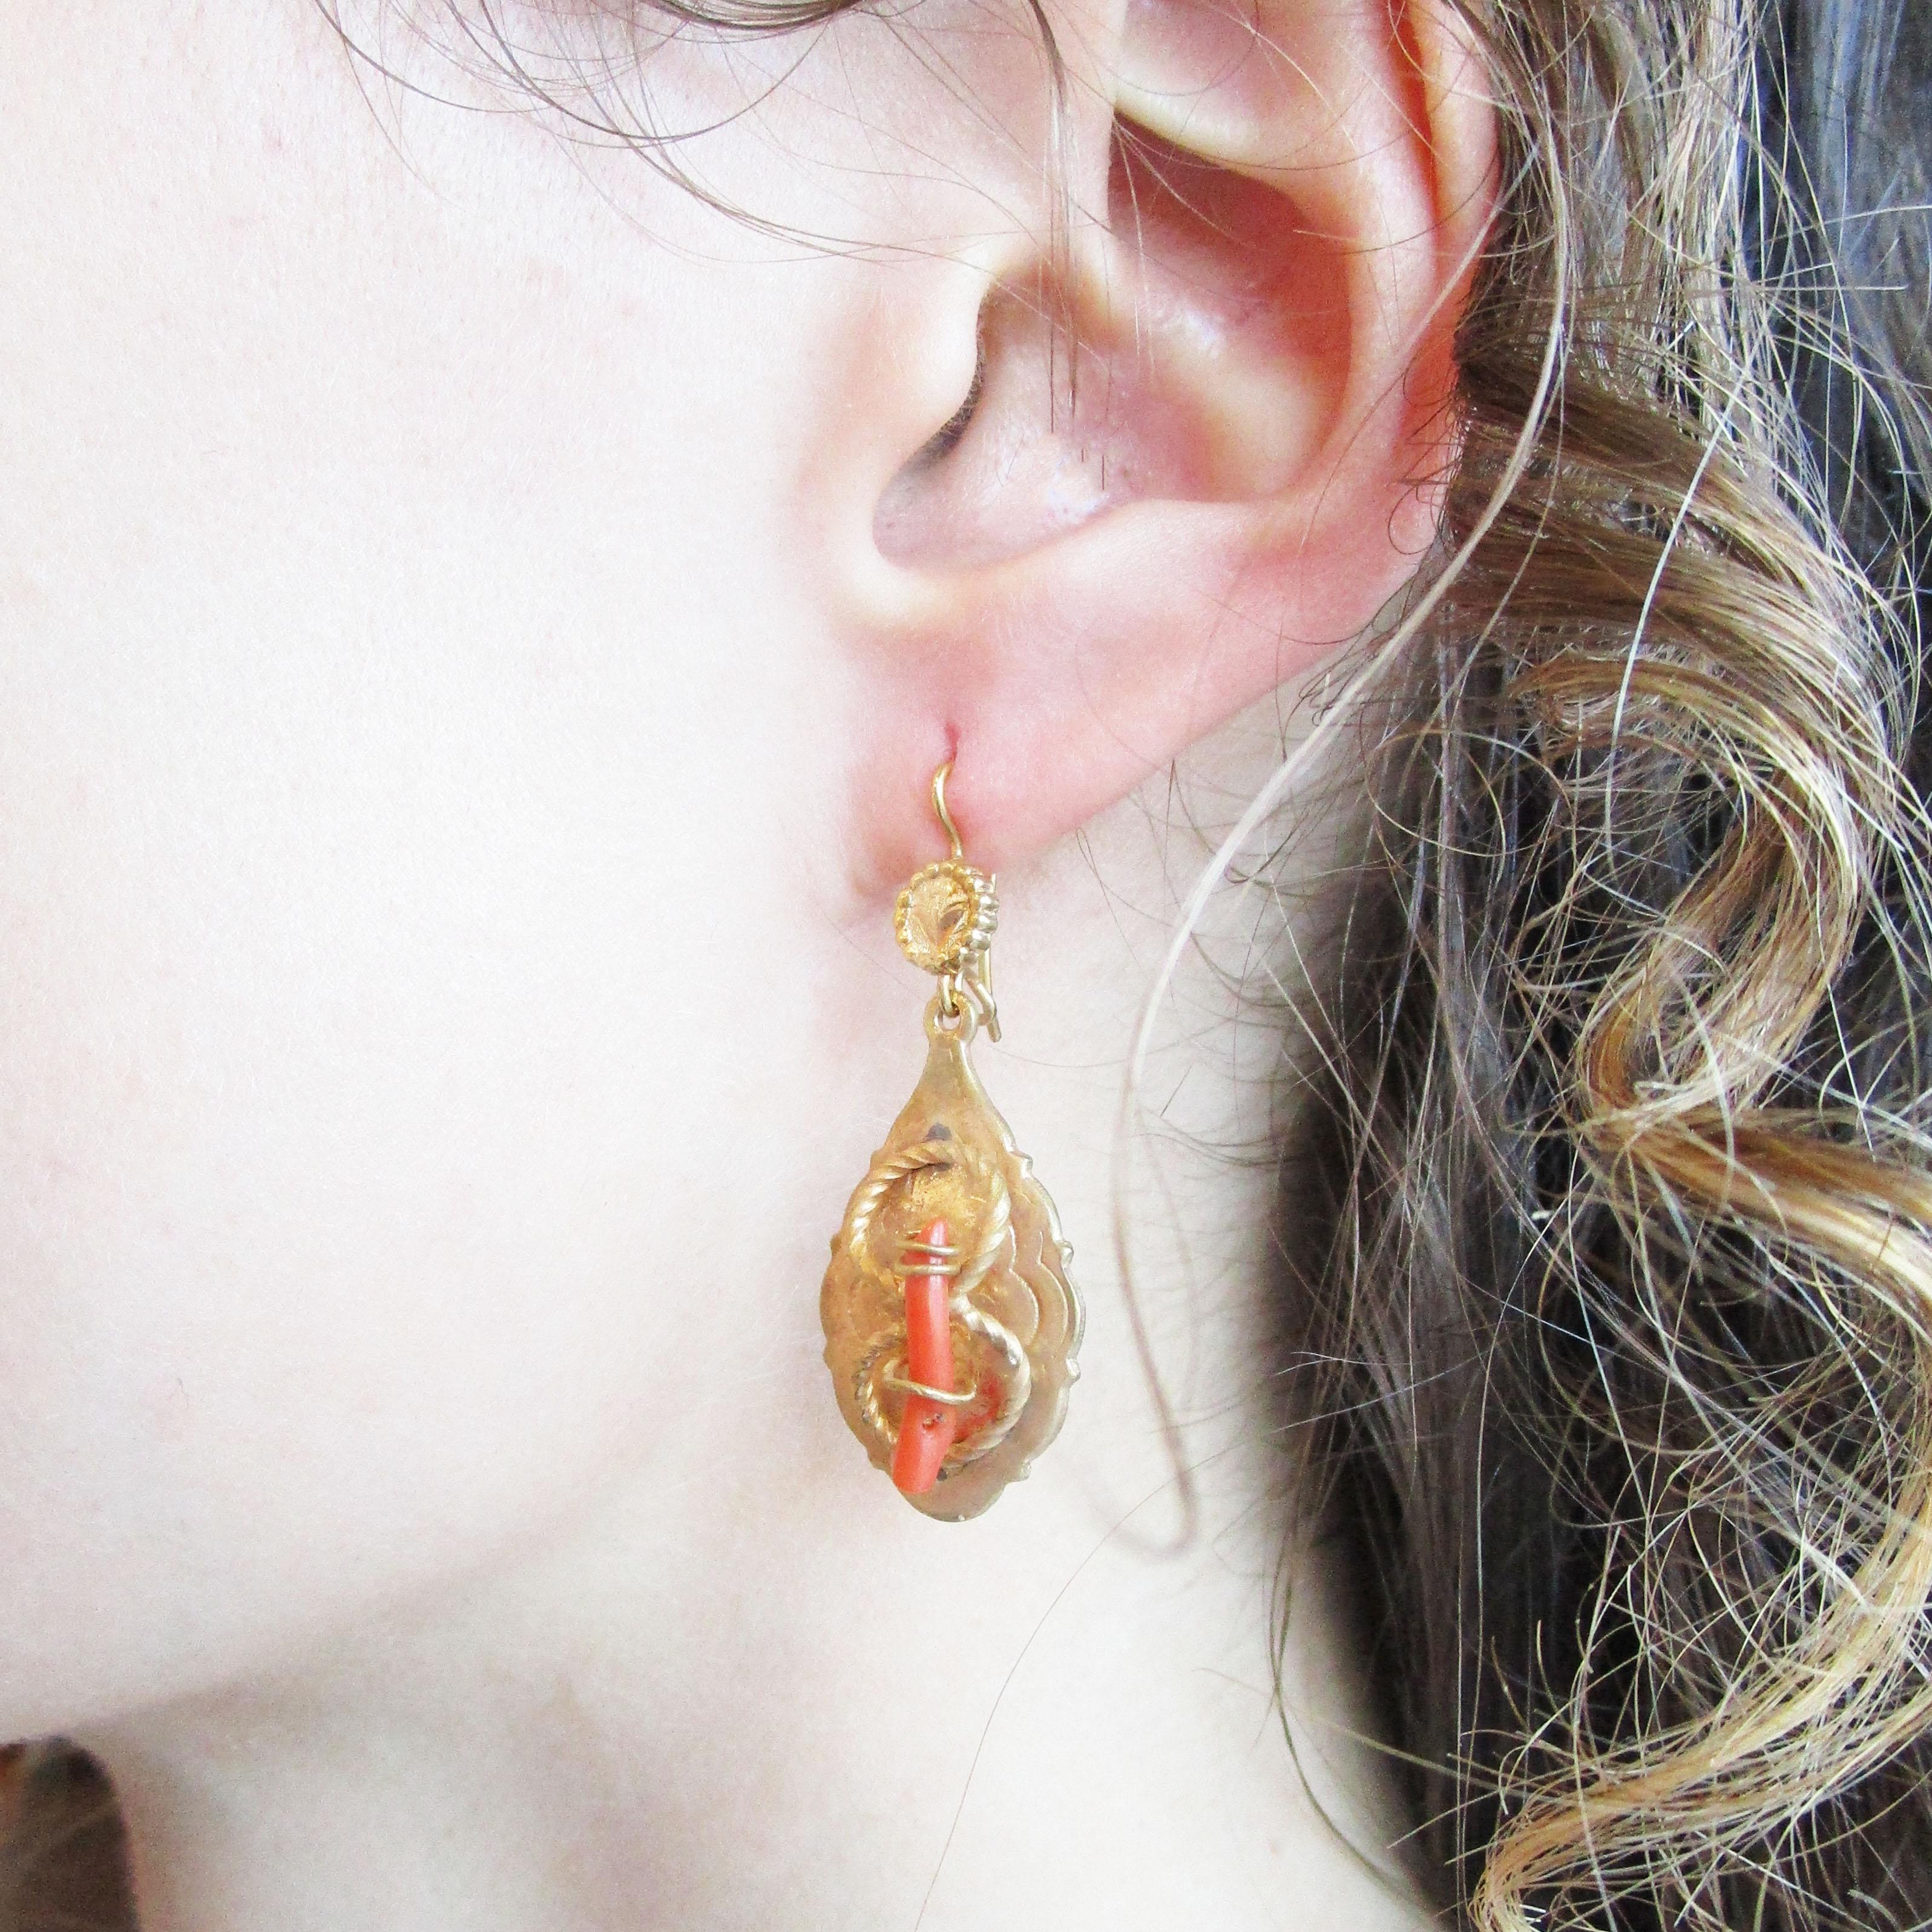 This is a stunning pair of Victorian dangle earrings dating from 1890 and featuring a gorgeous combination of gold-filled twist wire details and an undyed red coral branch center. The dangles have an elongated drop shape that flows well and is